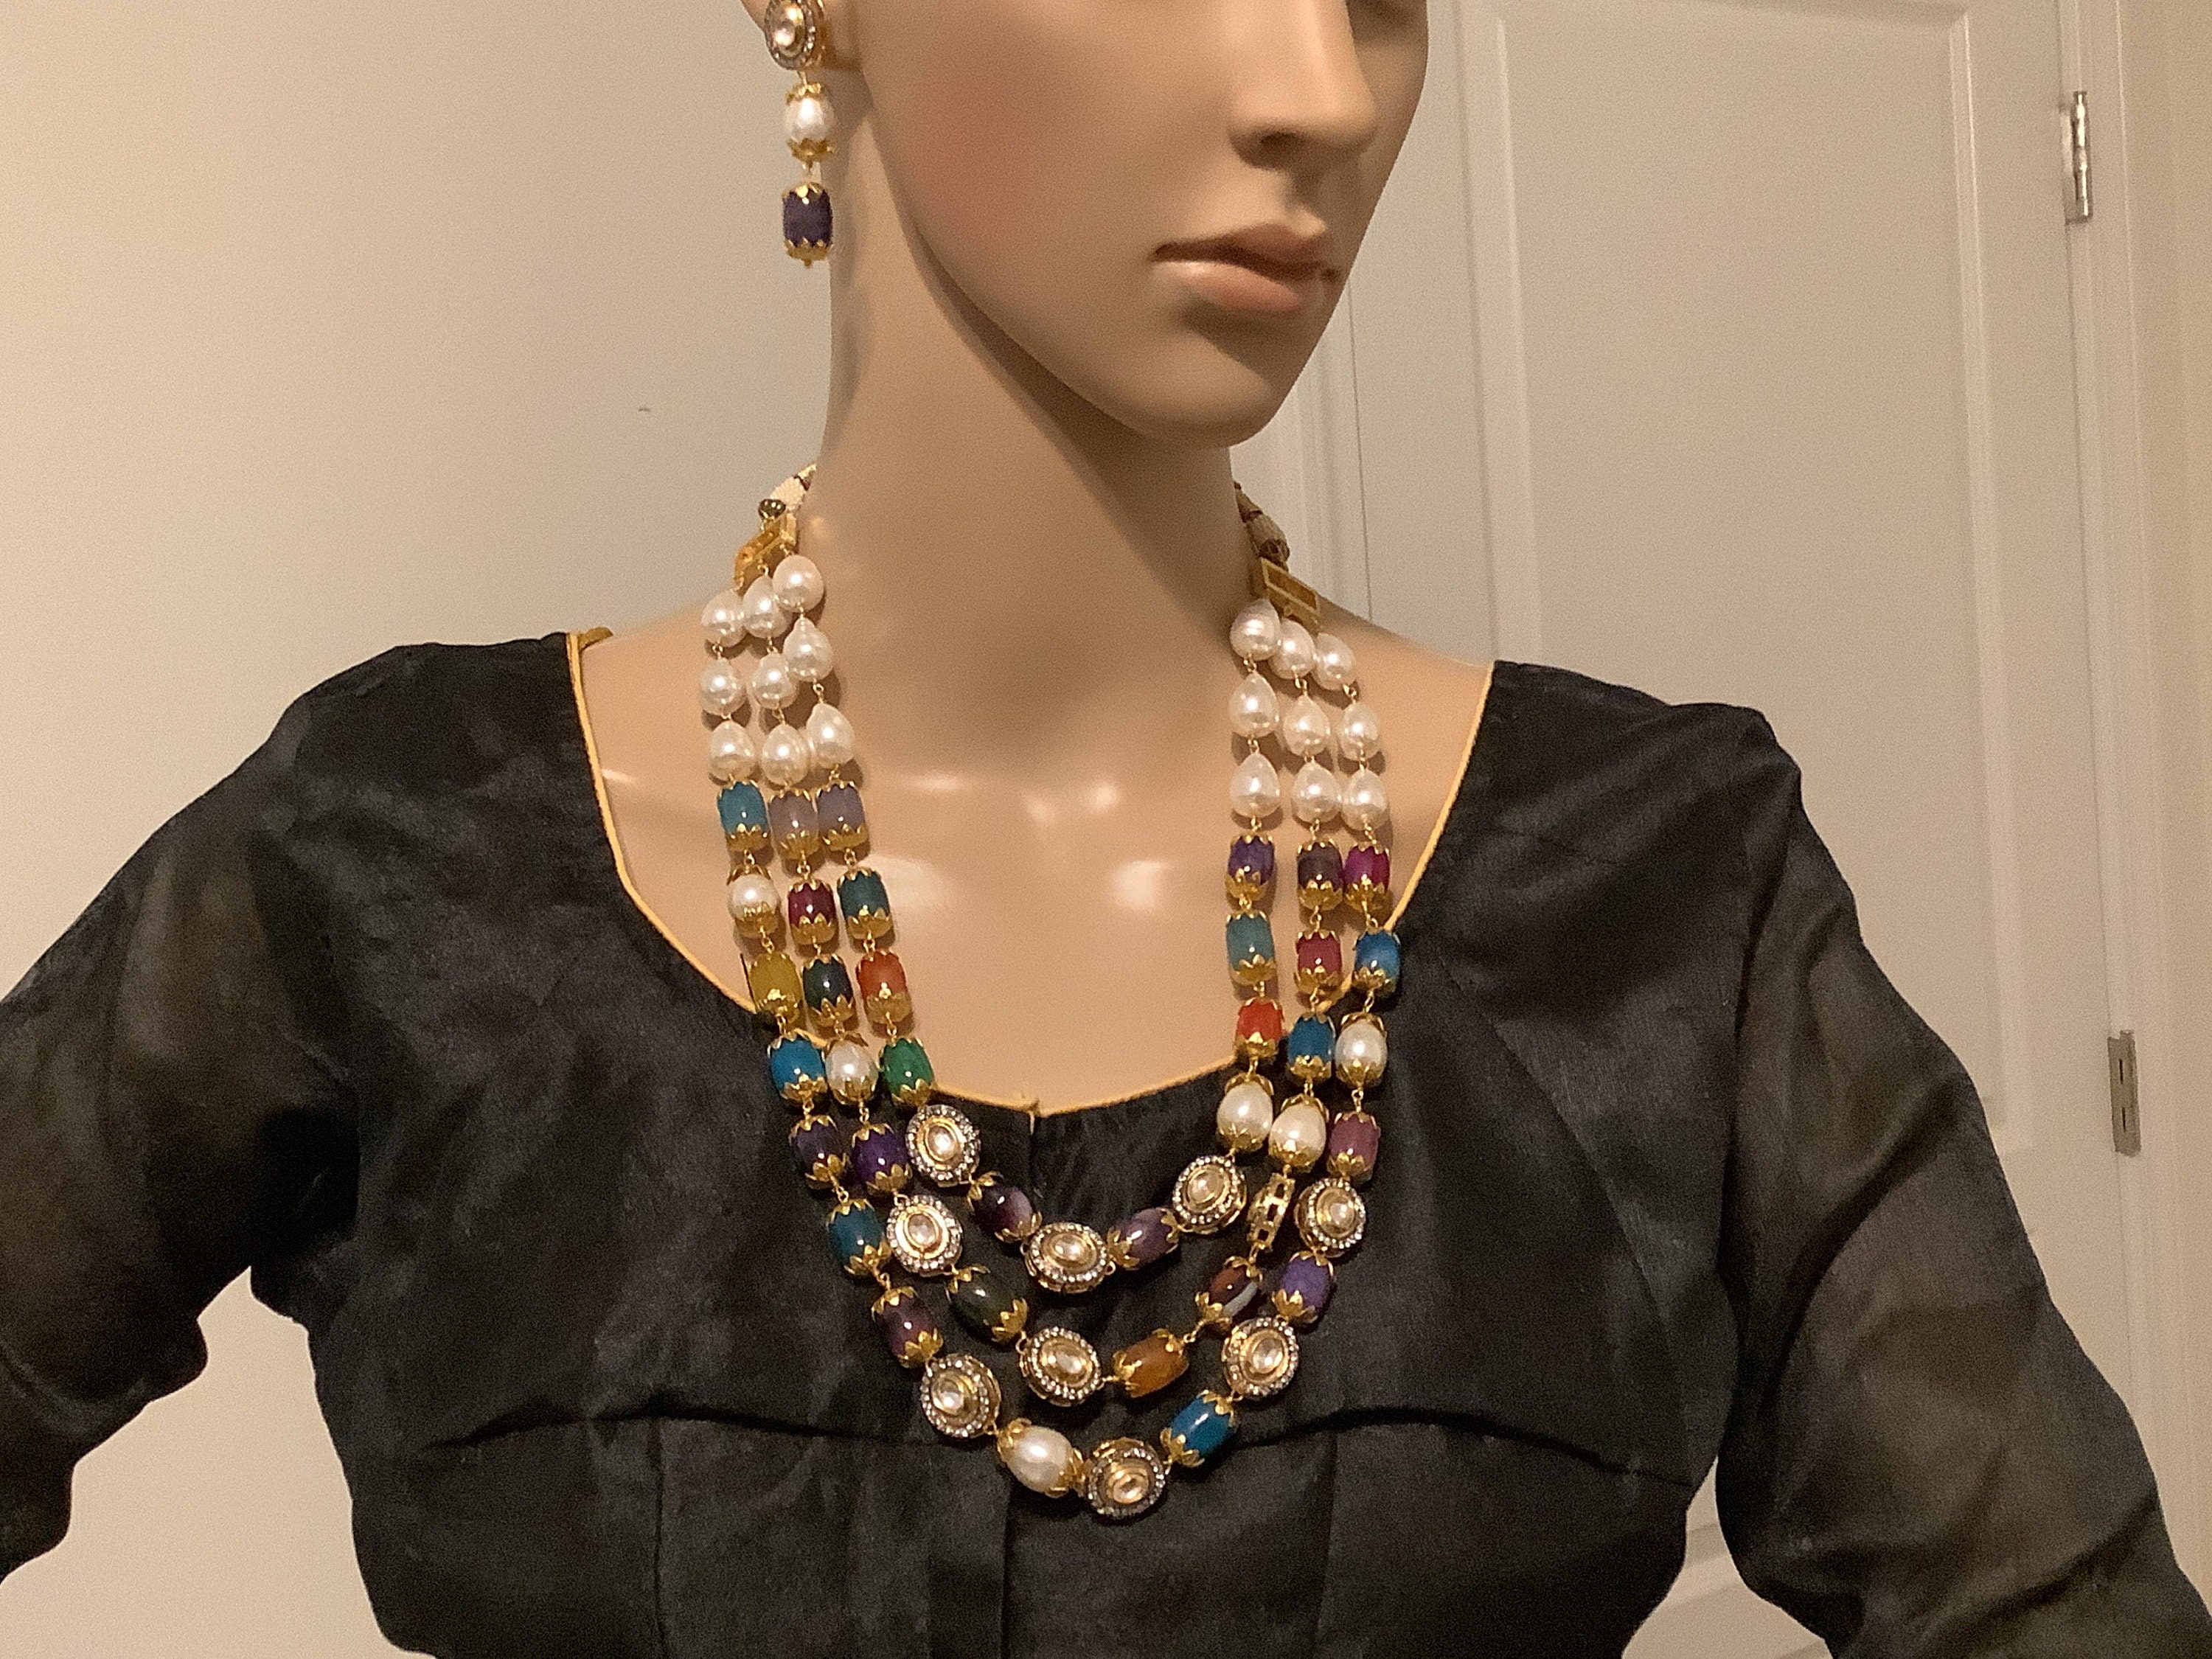 Buy 4-strand Pearl Necklace, Side With Coral, Turquoise, Pearls and  Swarovski, Multi-strand Necklace, Long Necklace, Italian Necklace Online in  India - Etsy